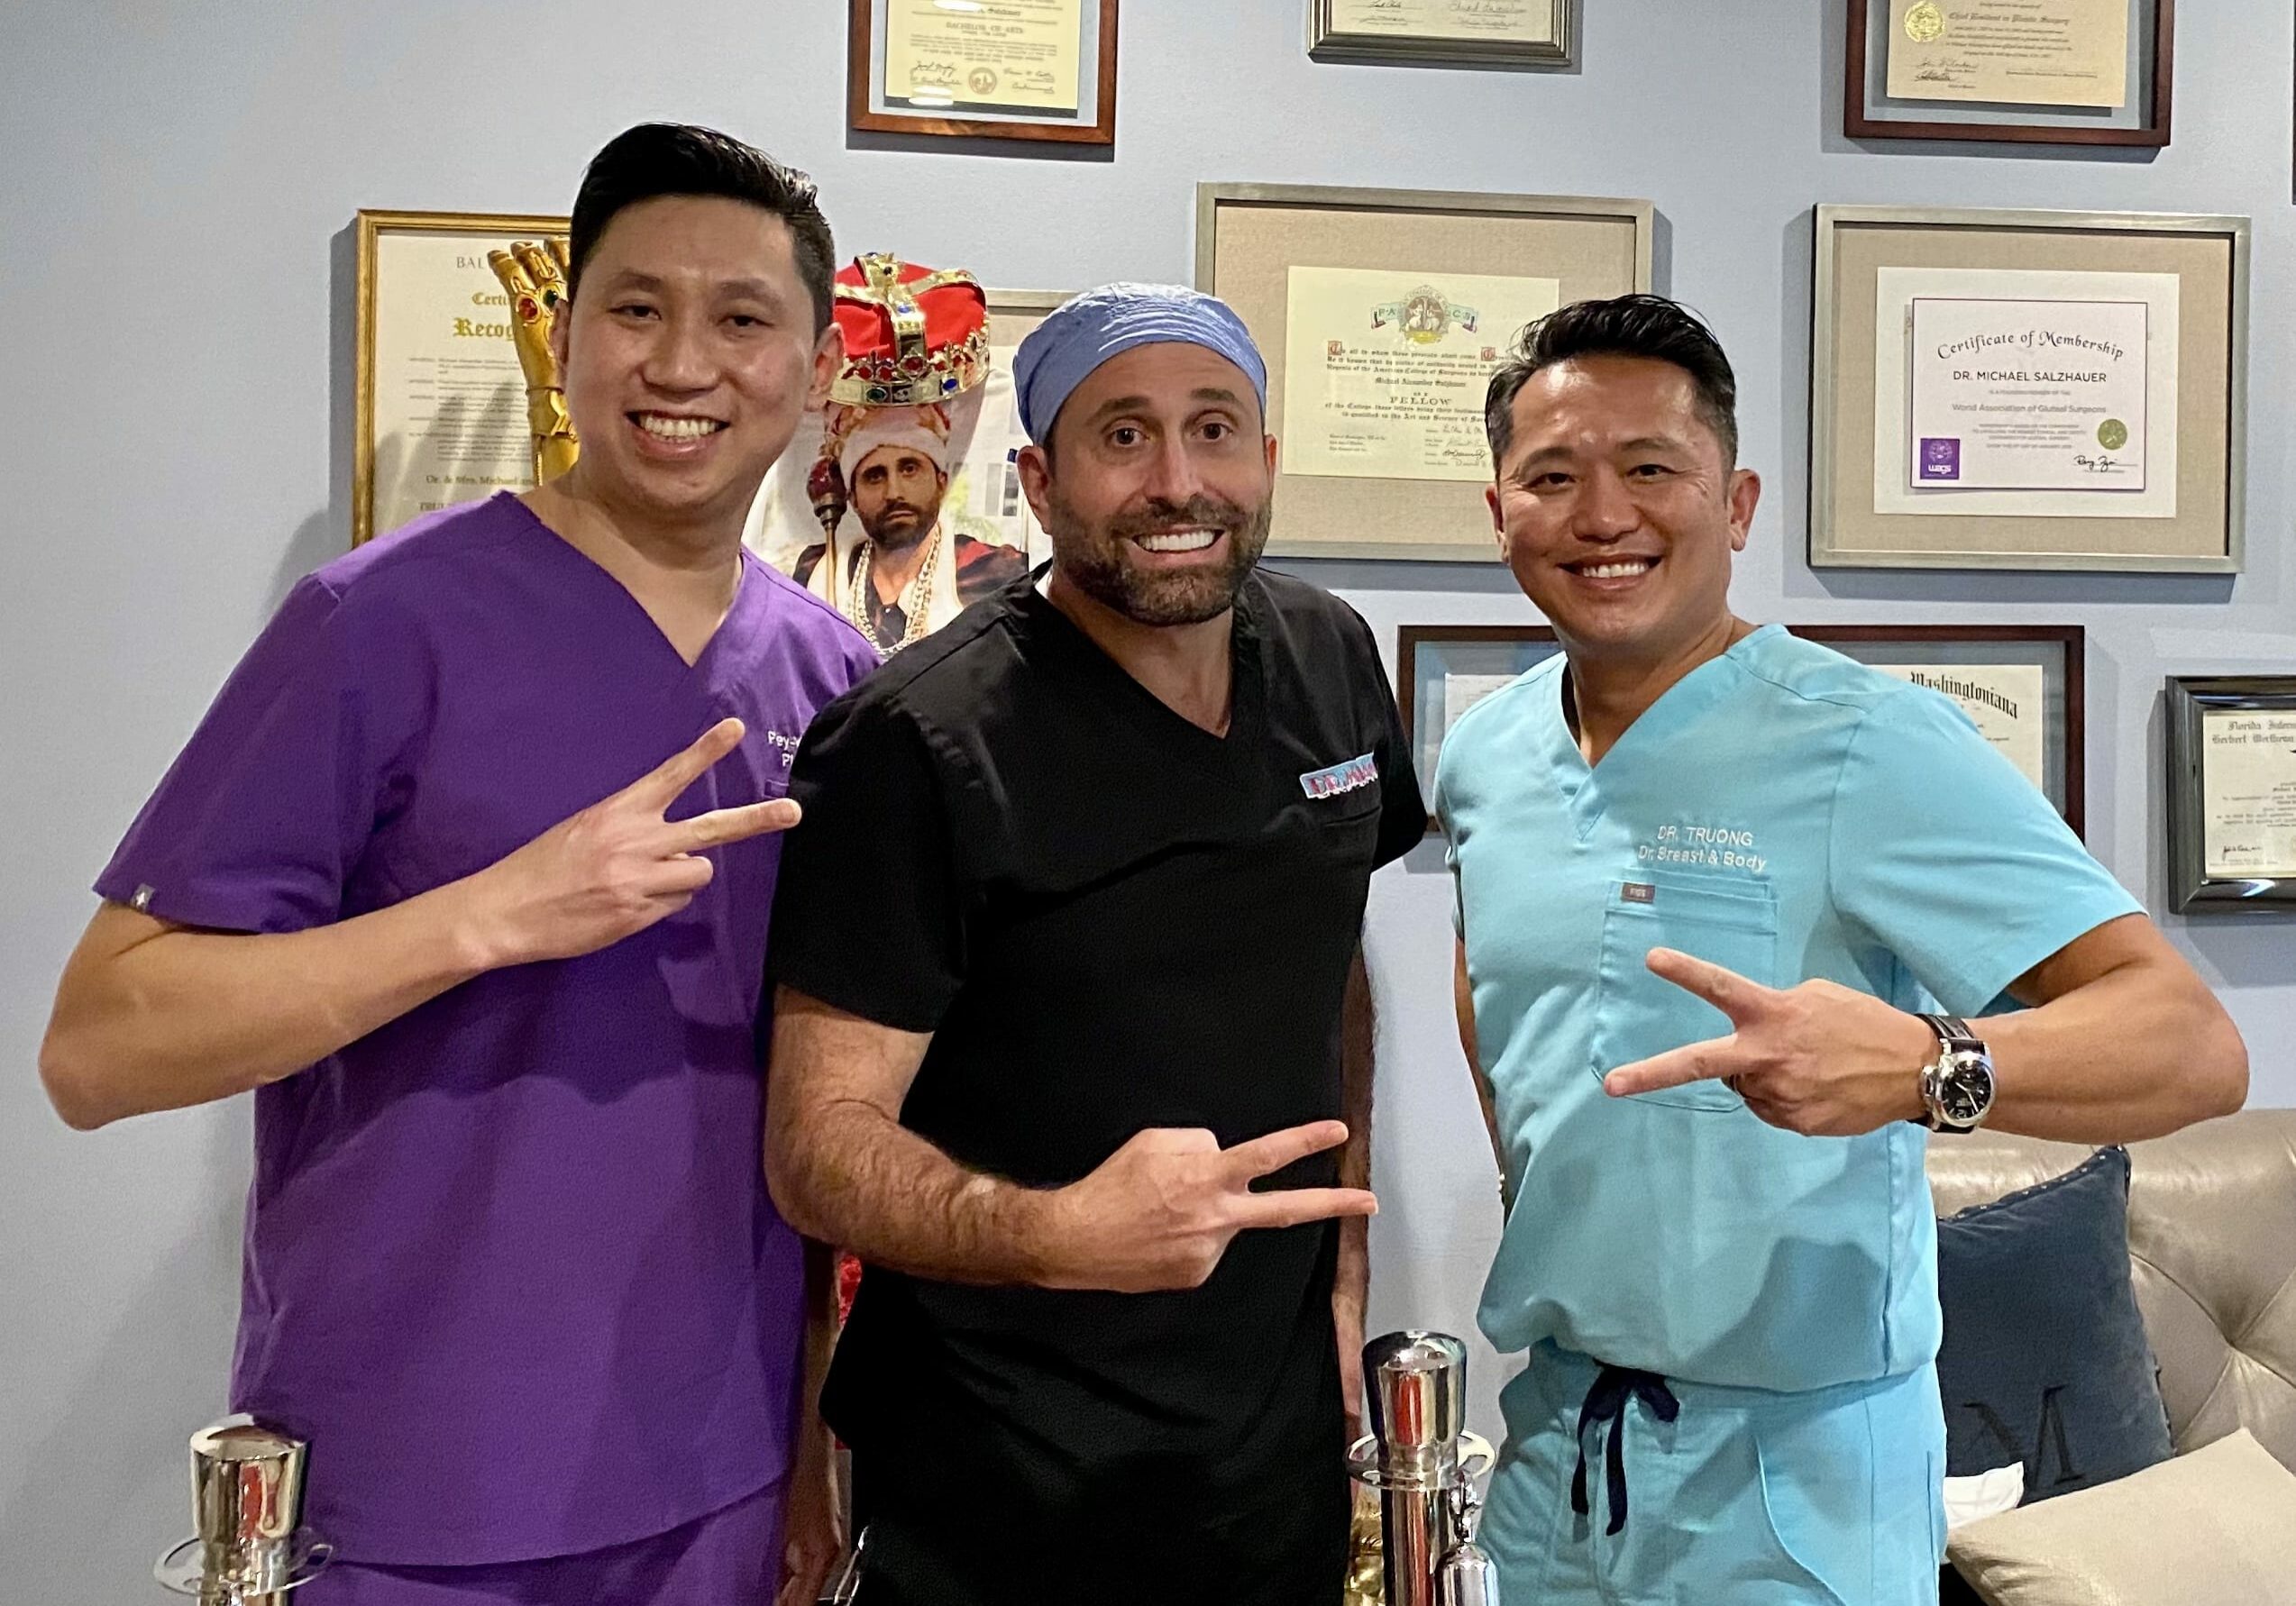 Dr. Miami Squad Members in Chicago Illinois - Dr. Anh Tuan Truong and Dr. Kevin Lin